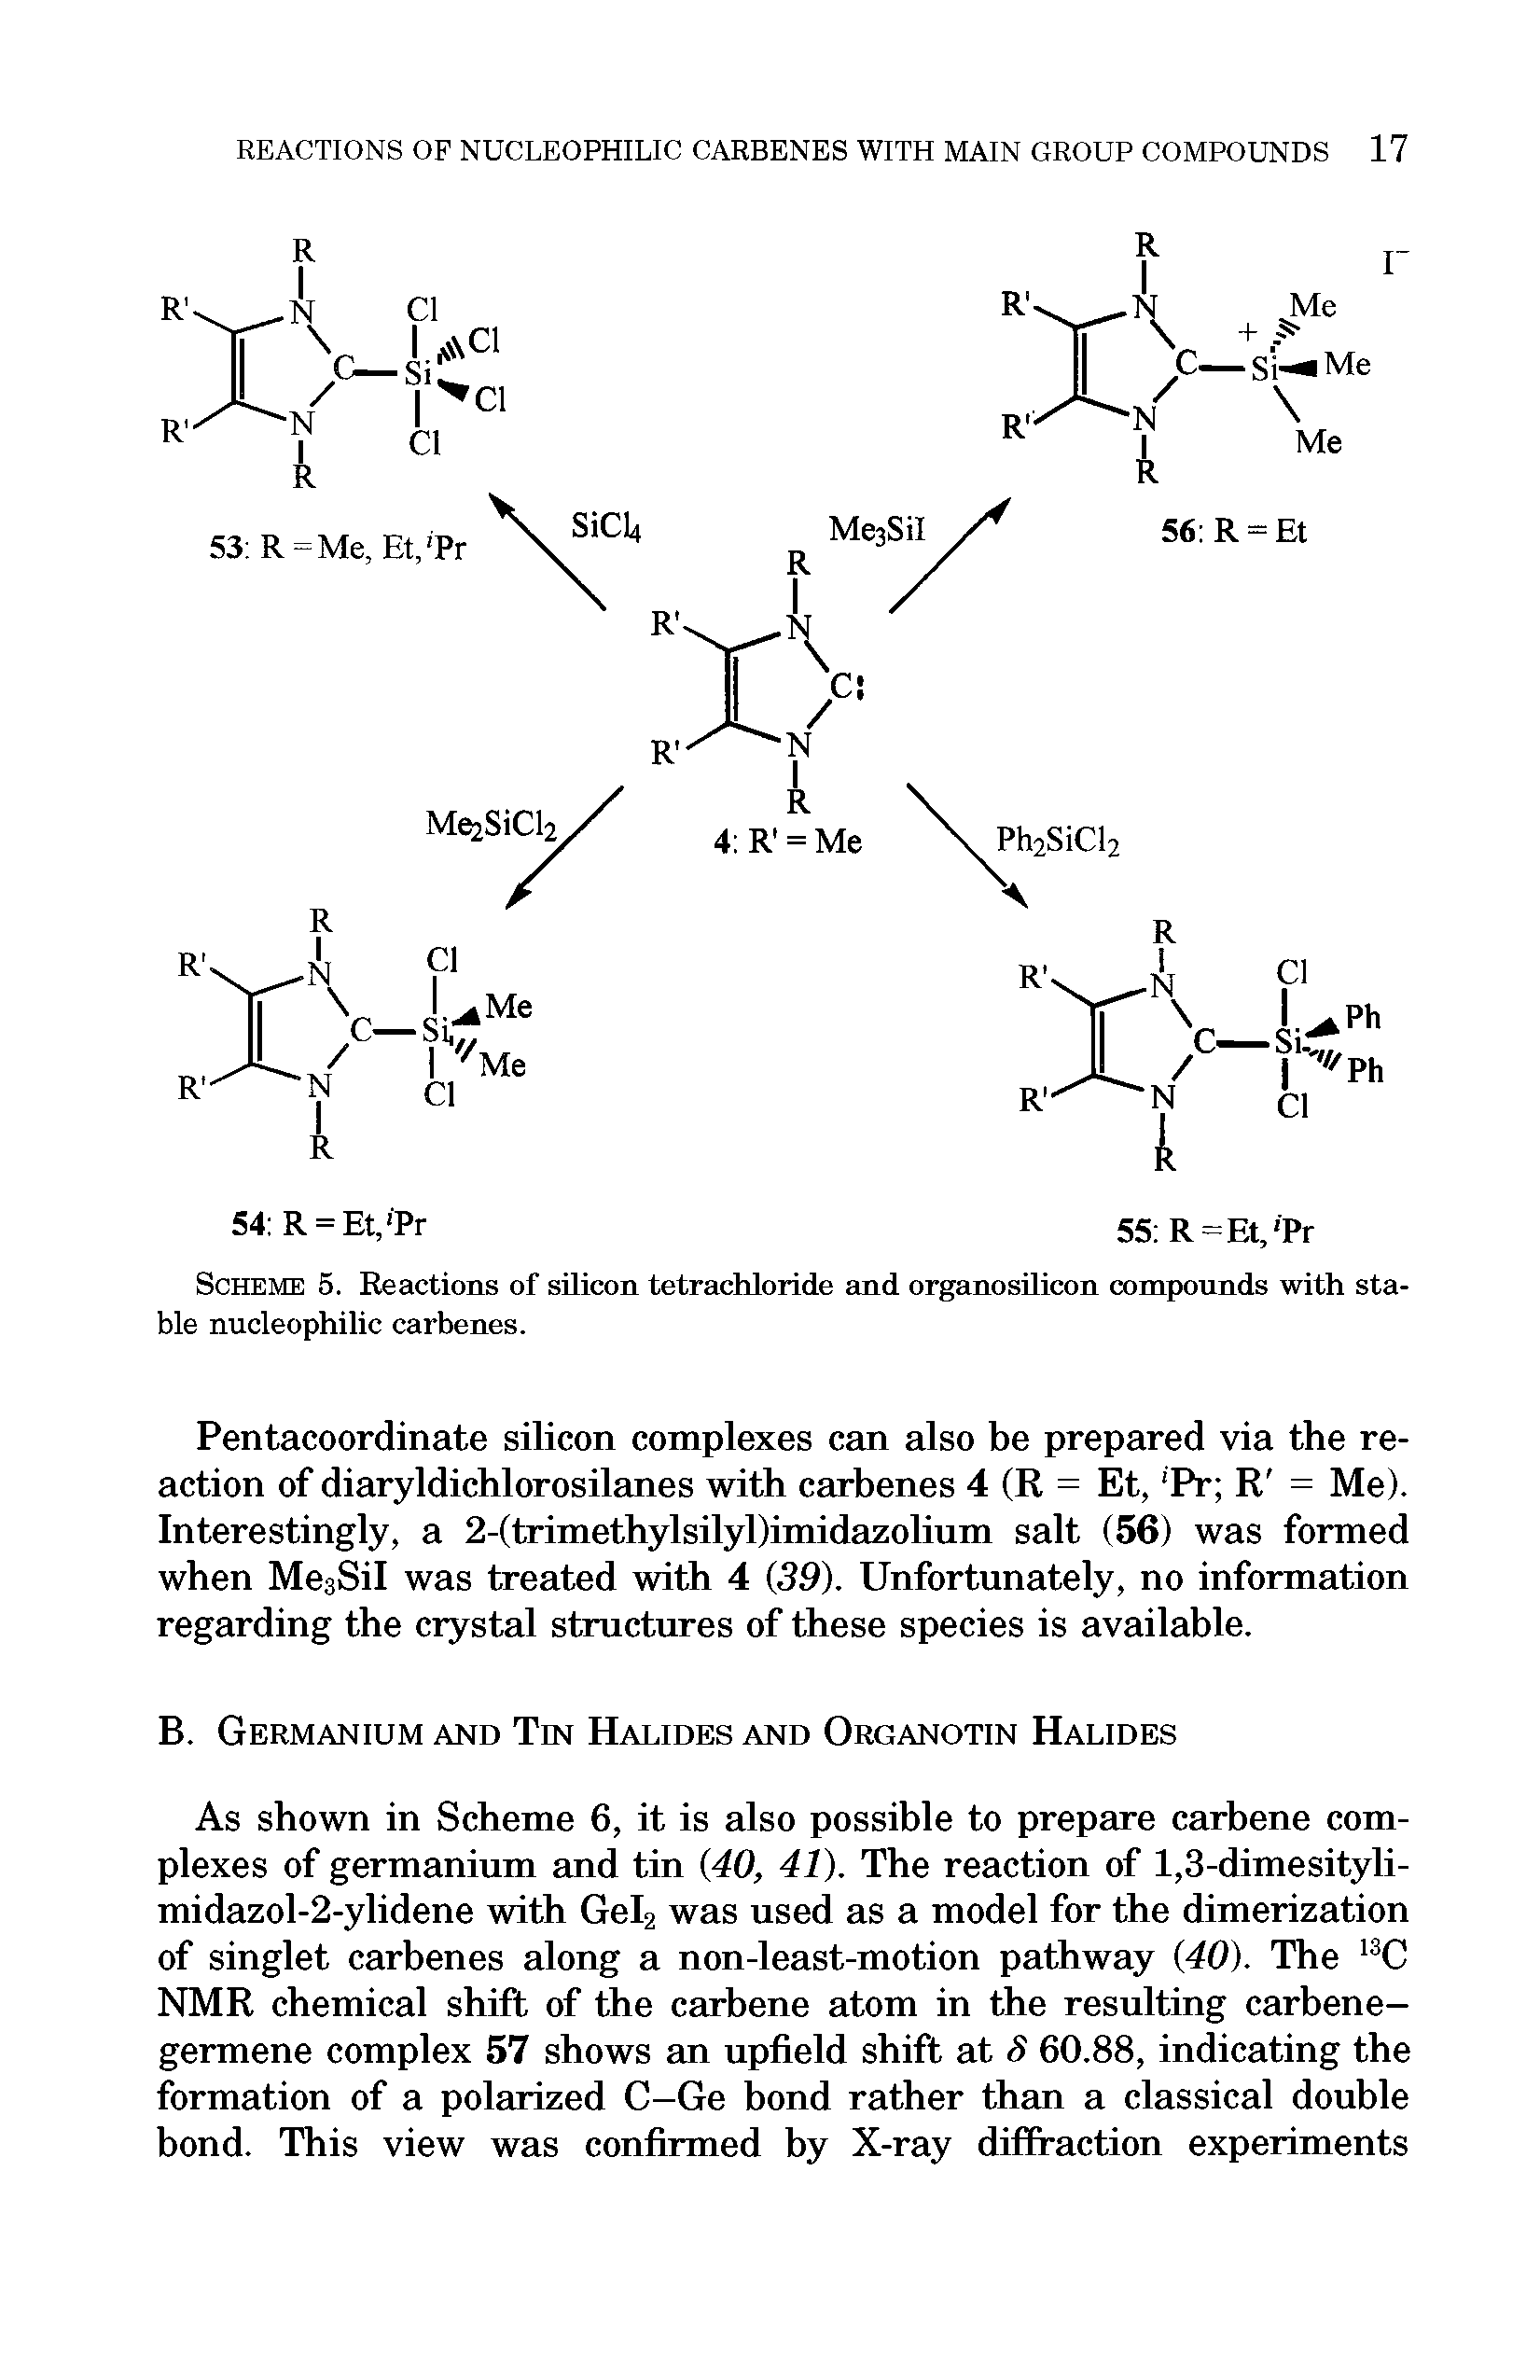 Scheme 5. Reactions of silicon tetrachloride and organosilicon compounds with stable nucleophilic carbenes.